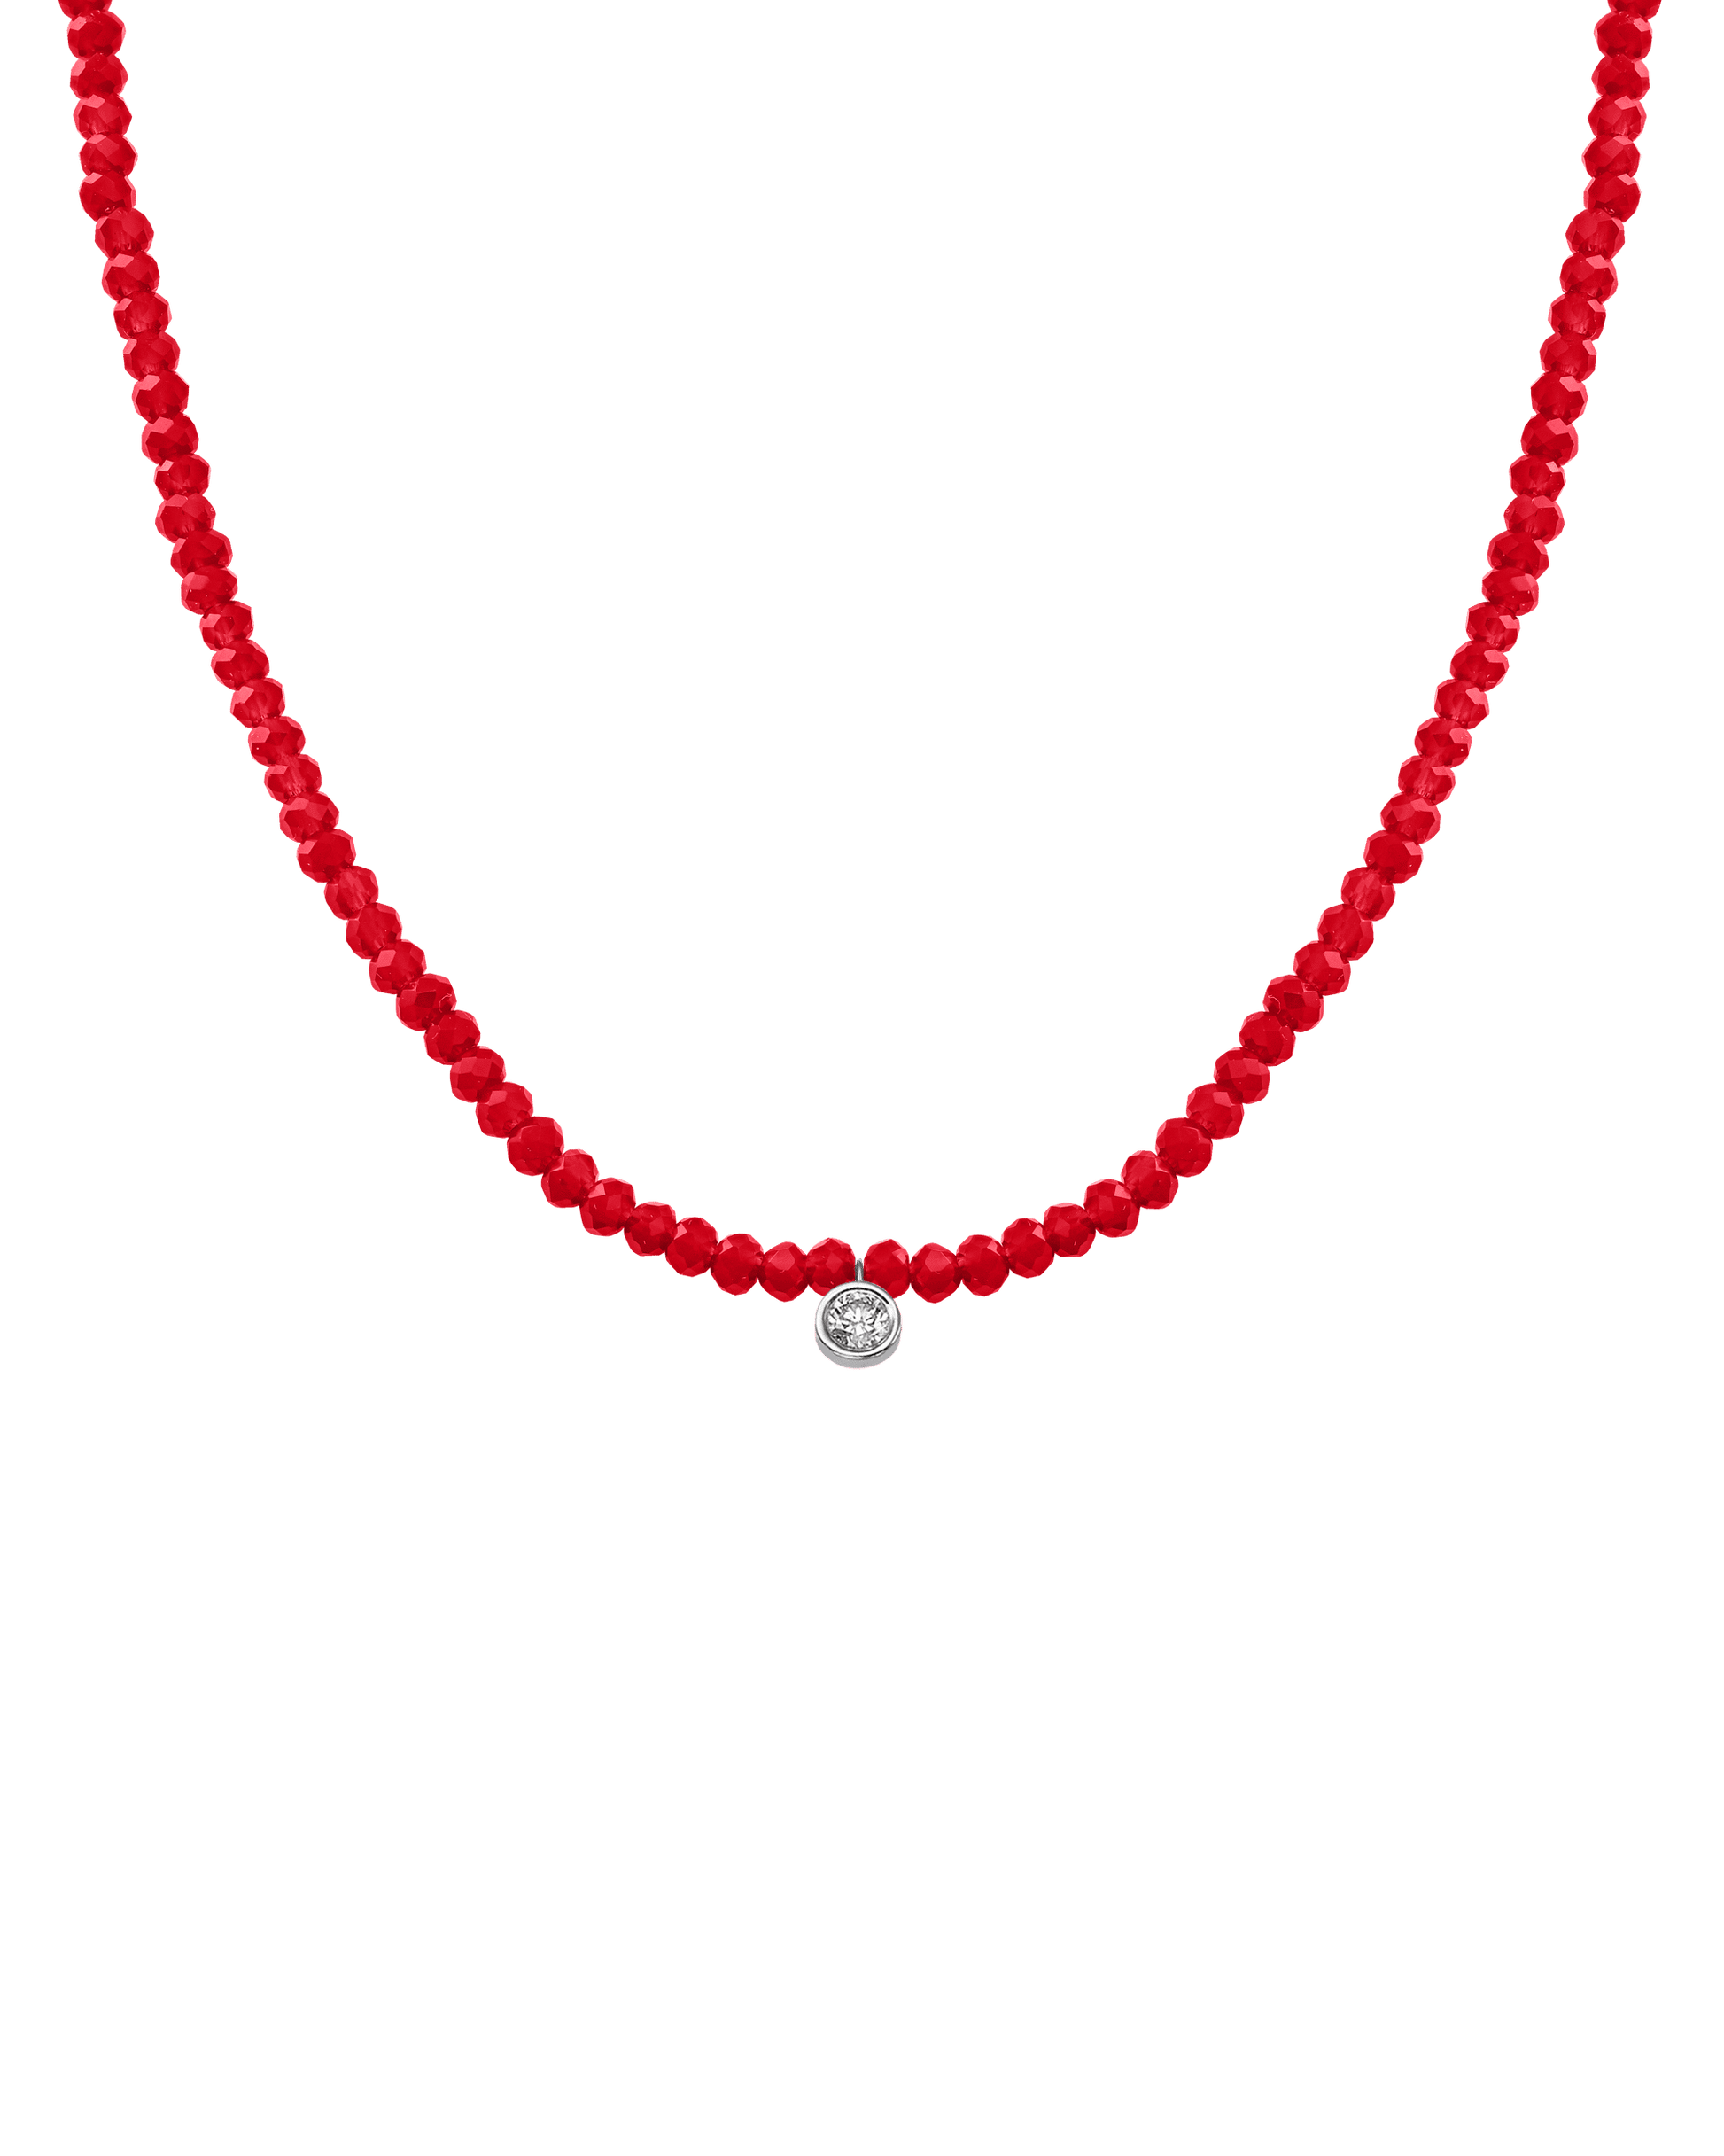 Apatite Gemstone & Diamond Necklace - 14K White Gold Necklaces 14K Solid Gold Natural Red Jade Large: 0.10ct 14"